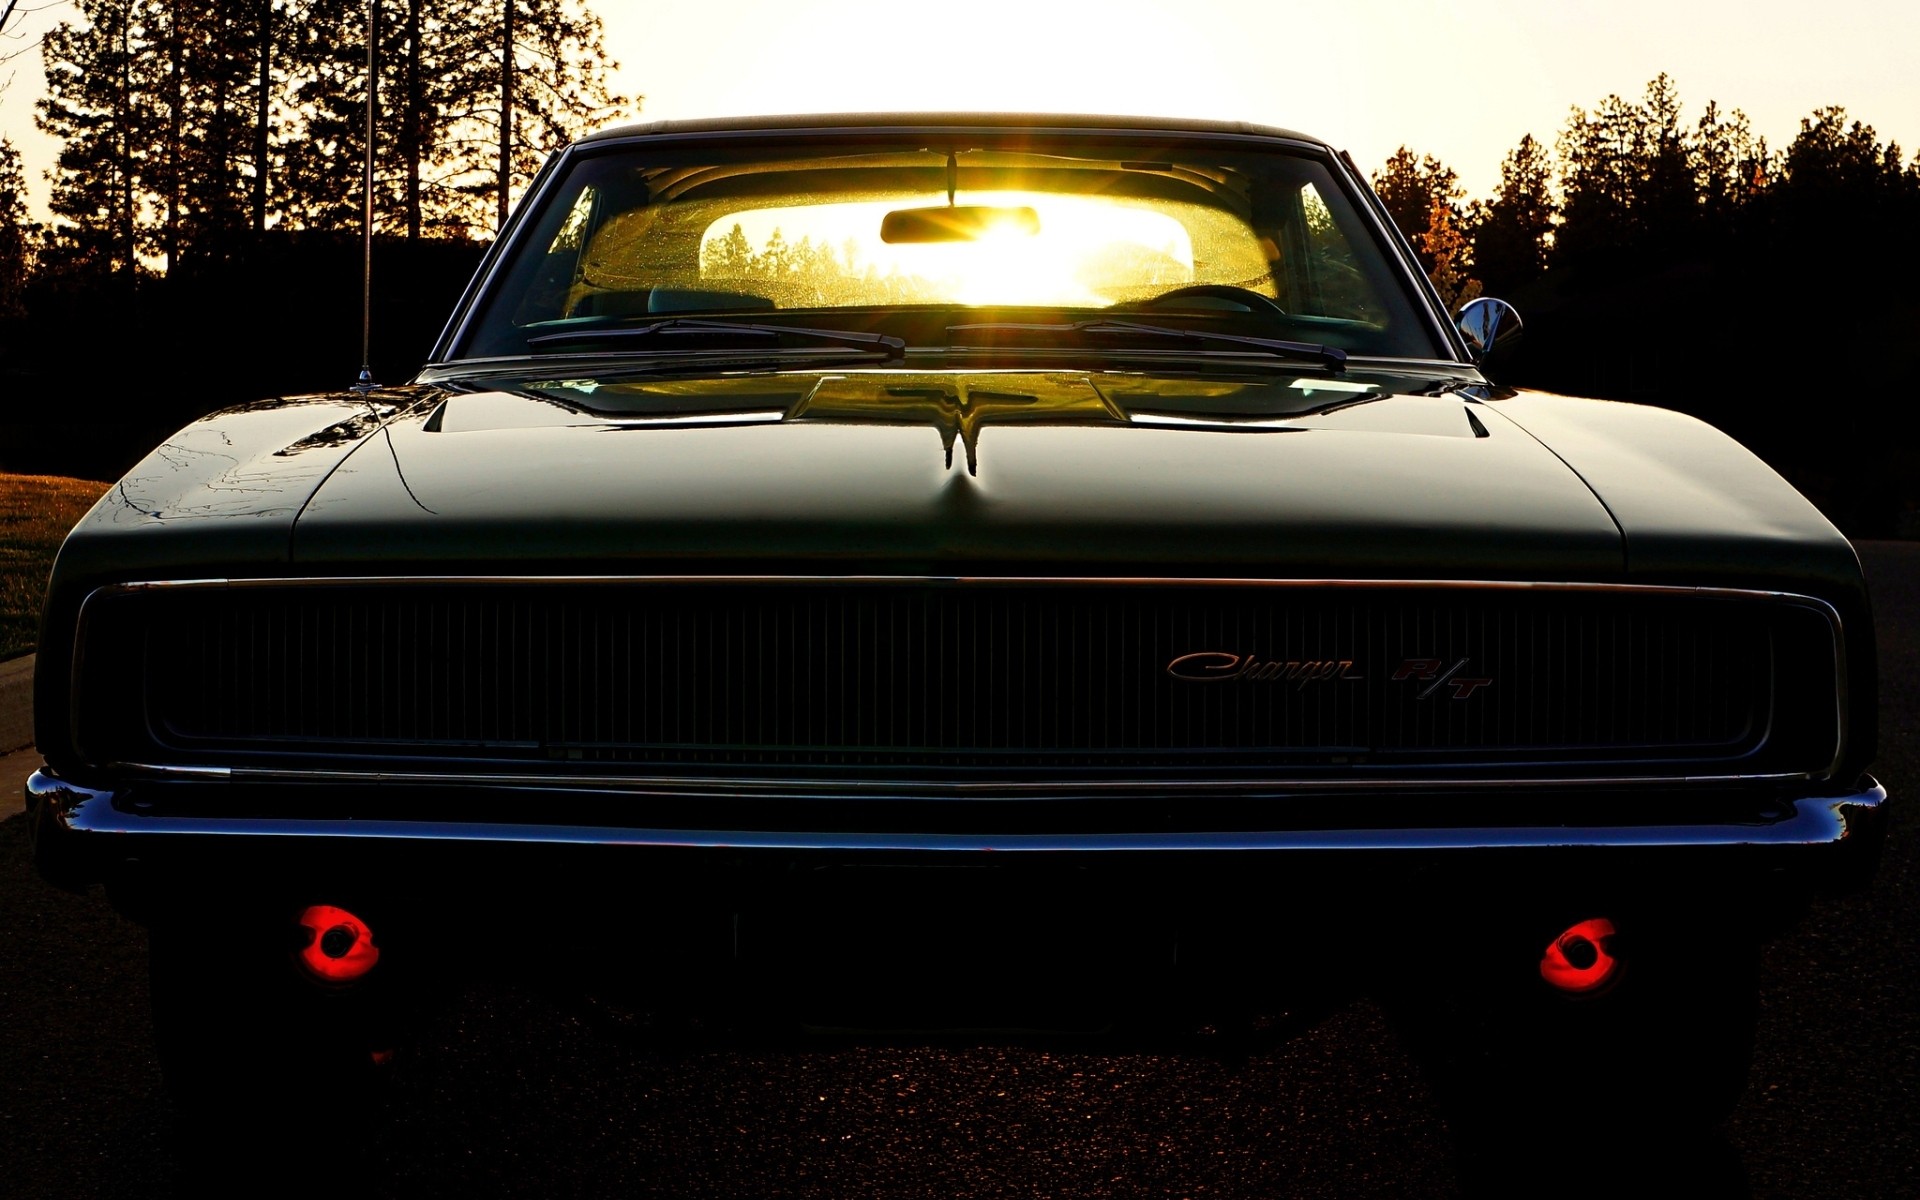 Old School Dodge Charger wallpapers Old School Dodge Charger stock